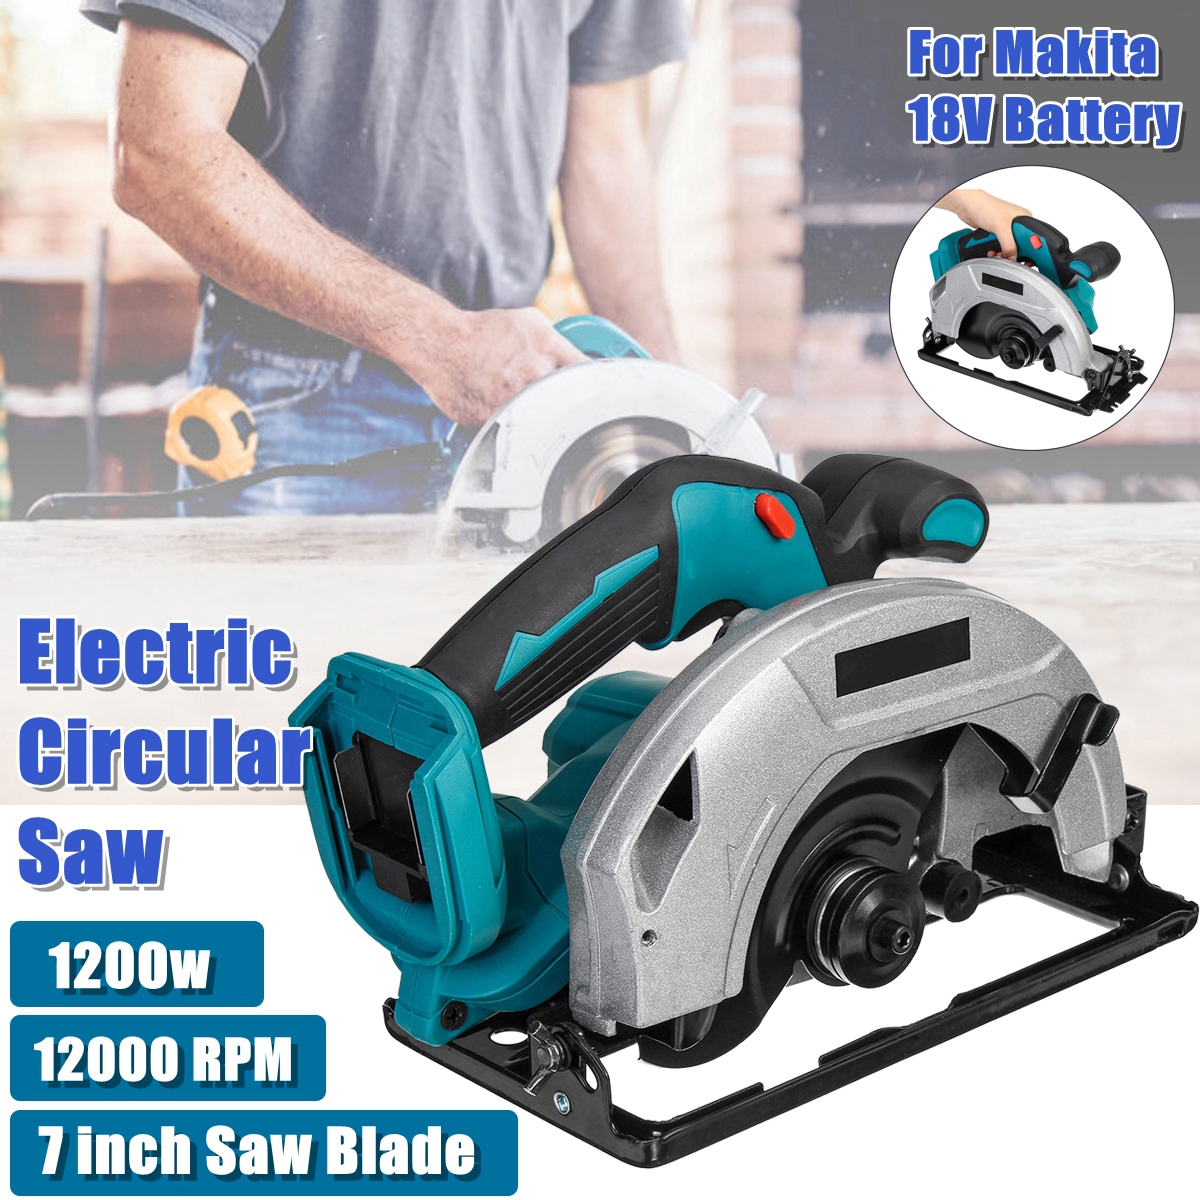 18V-Brushless-Electric-Circular-Saw-Cutting-Machine-Work-Portable-For-Makita-Battery-1695396-1